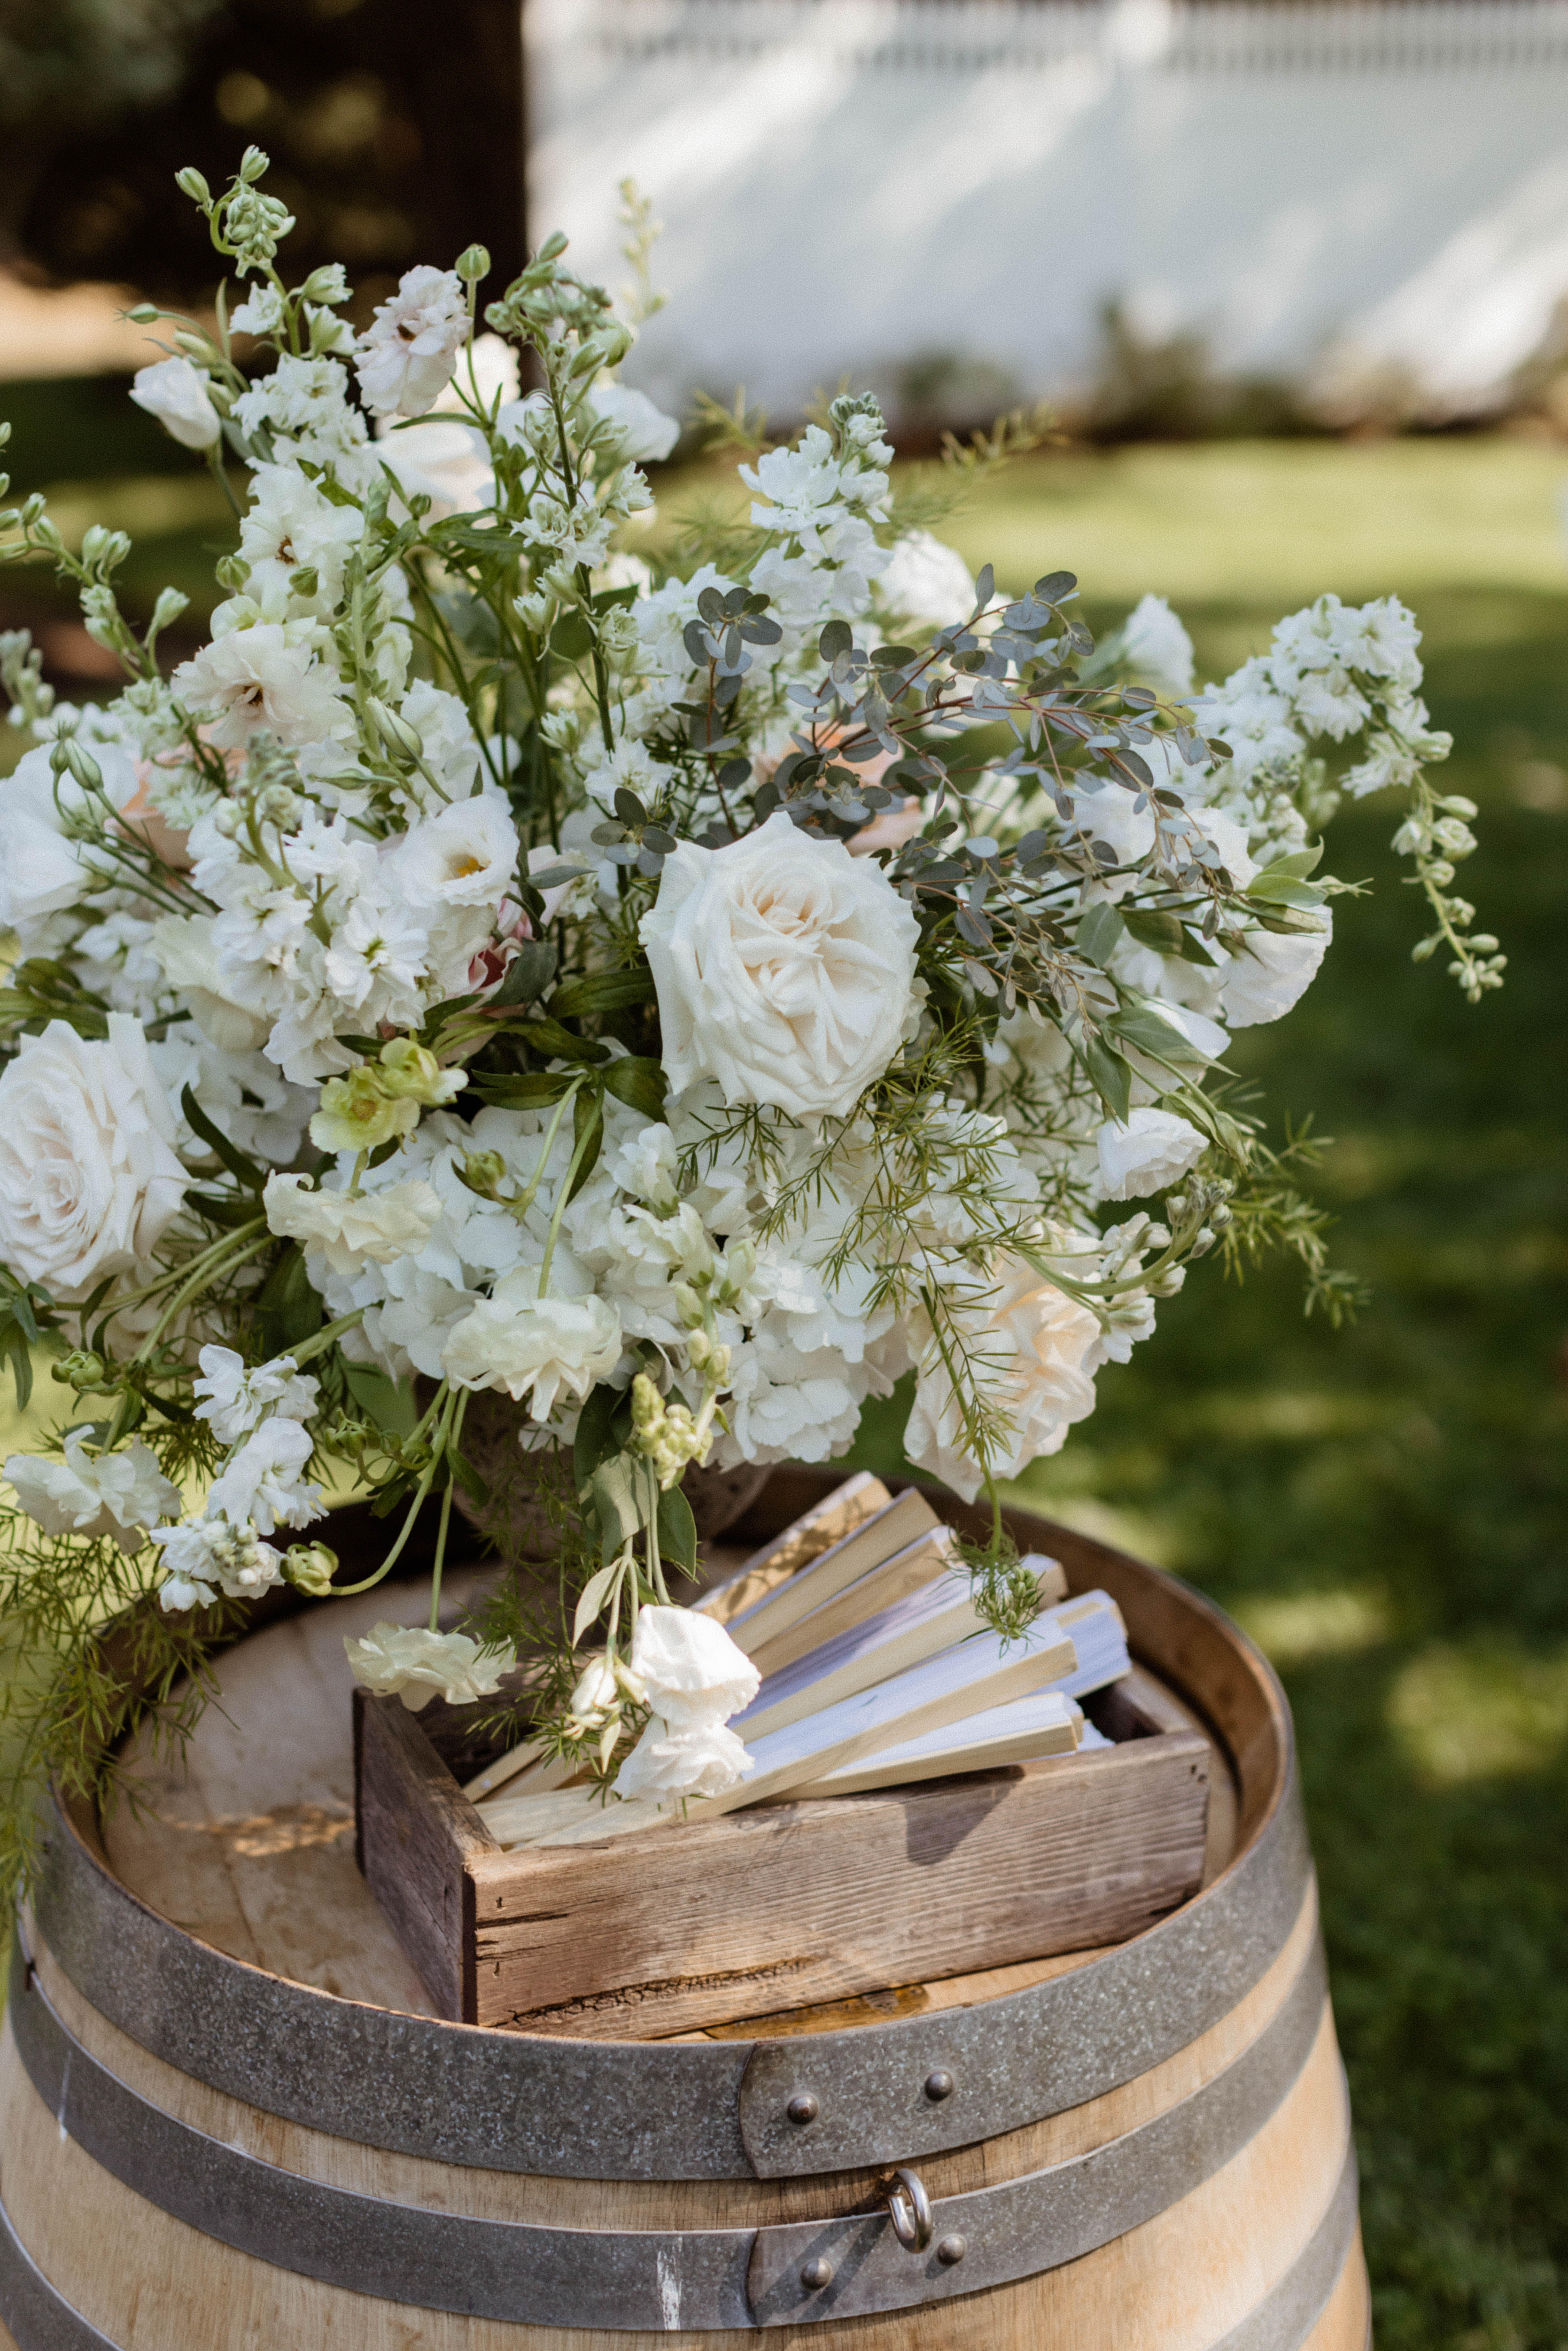 Bedell winery wedding venue filled with flowers on a stunning wedding day